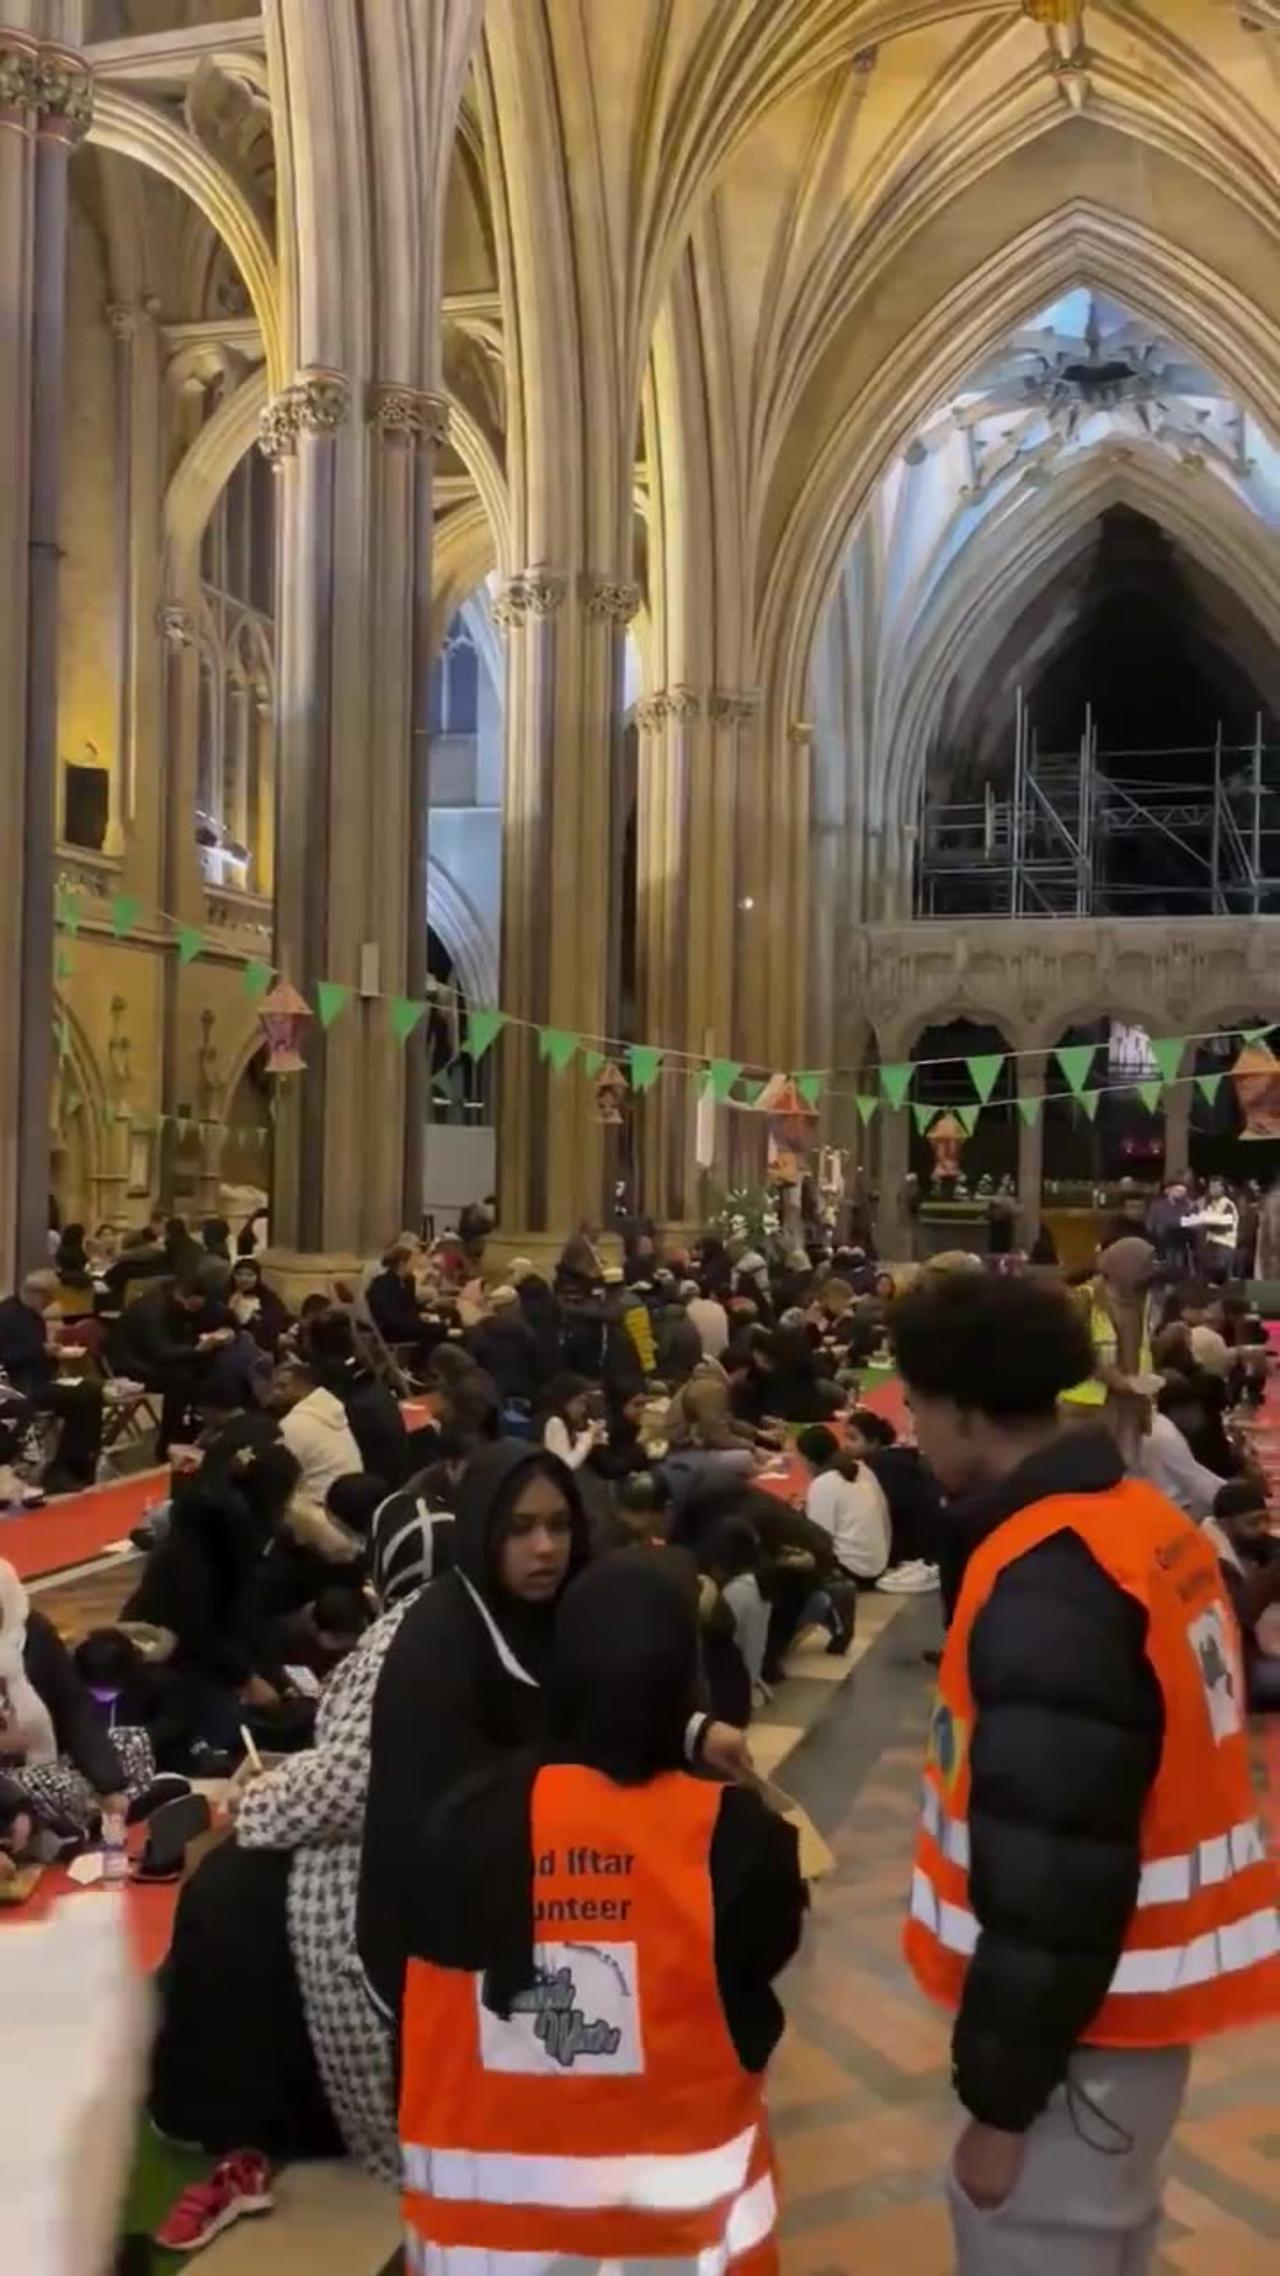 This is Bristol Cathedral in UK today we are losing out identities